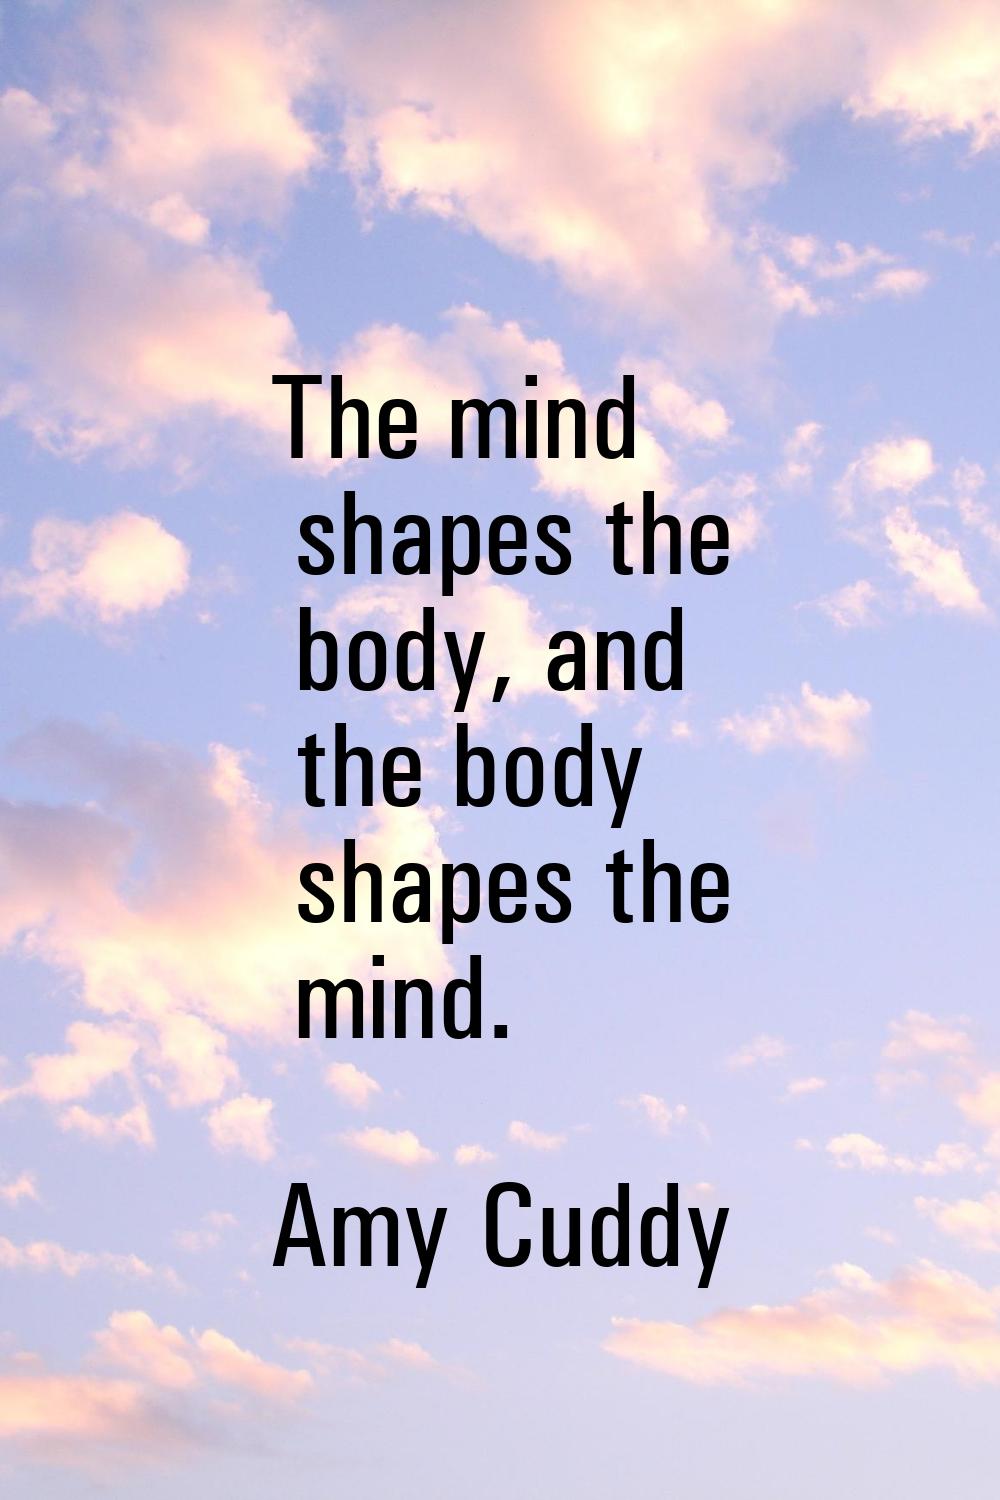 The mind shapes the body, and the body shapes the mind.